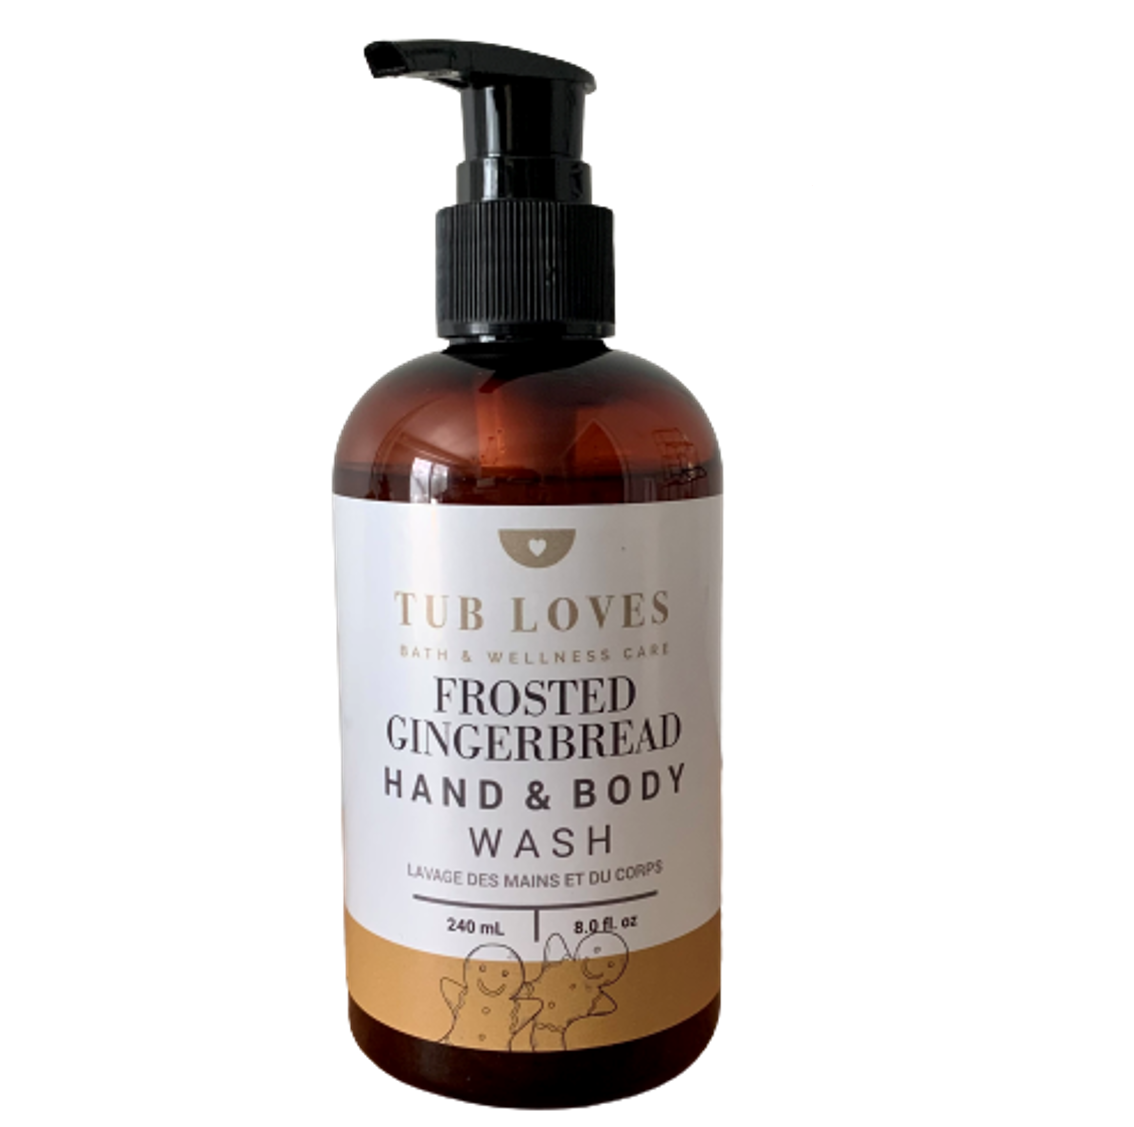 Frosted Gingerbread - Hand and Body Wash - Tub Loves